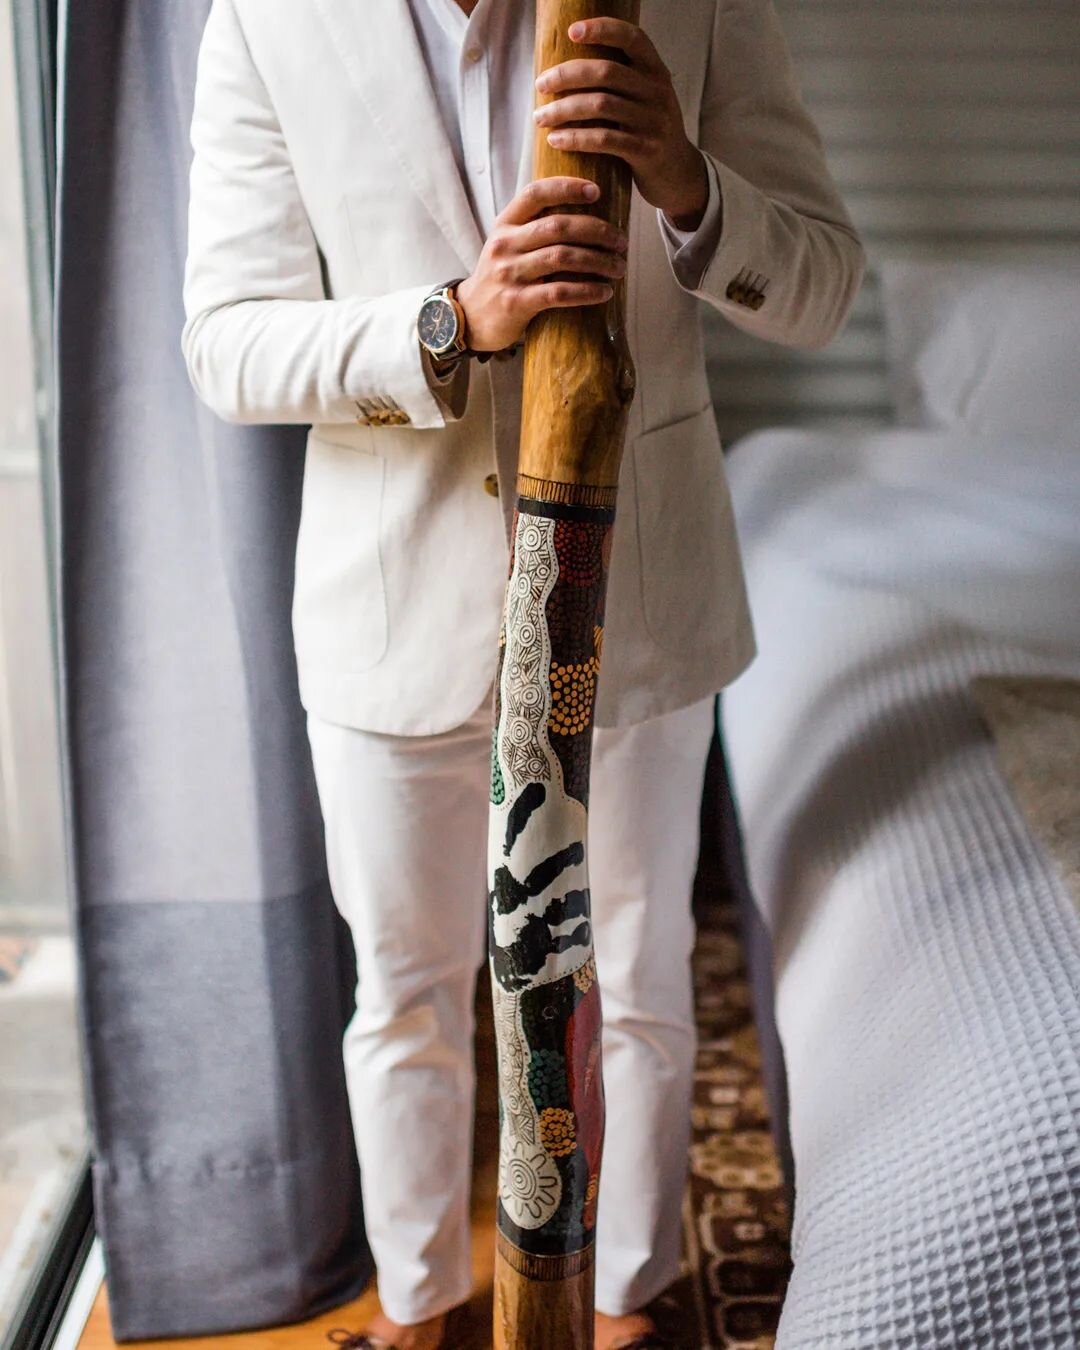 Ambrose hand carved and painted this beautiful didgeridoo. After dinner with their nearest and dearest, he played it for his stunning new bride. He's an amazing artist if you want to follow him @ambrosekcreative

Wedding wizards 💕
Photo: @girlandthe